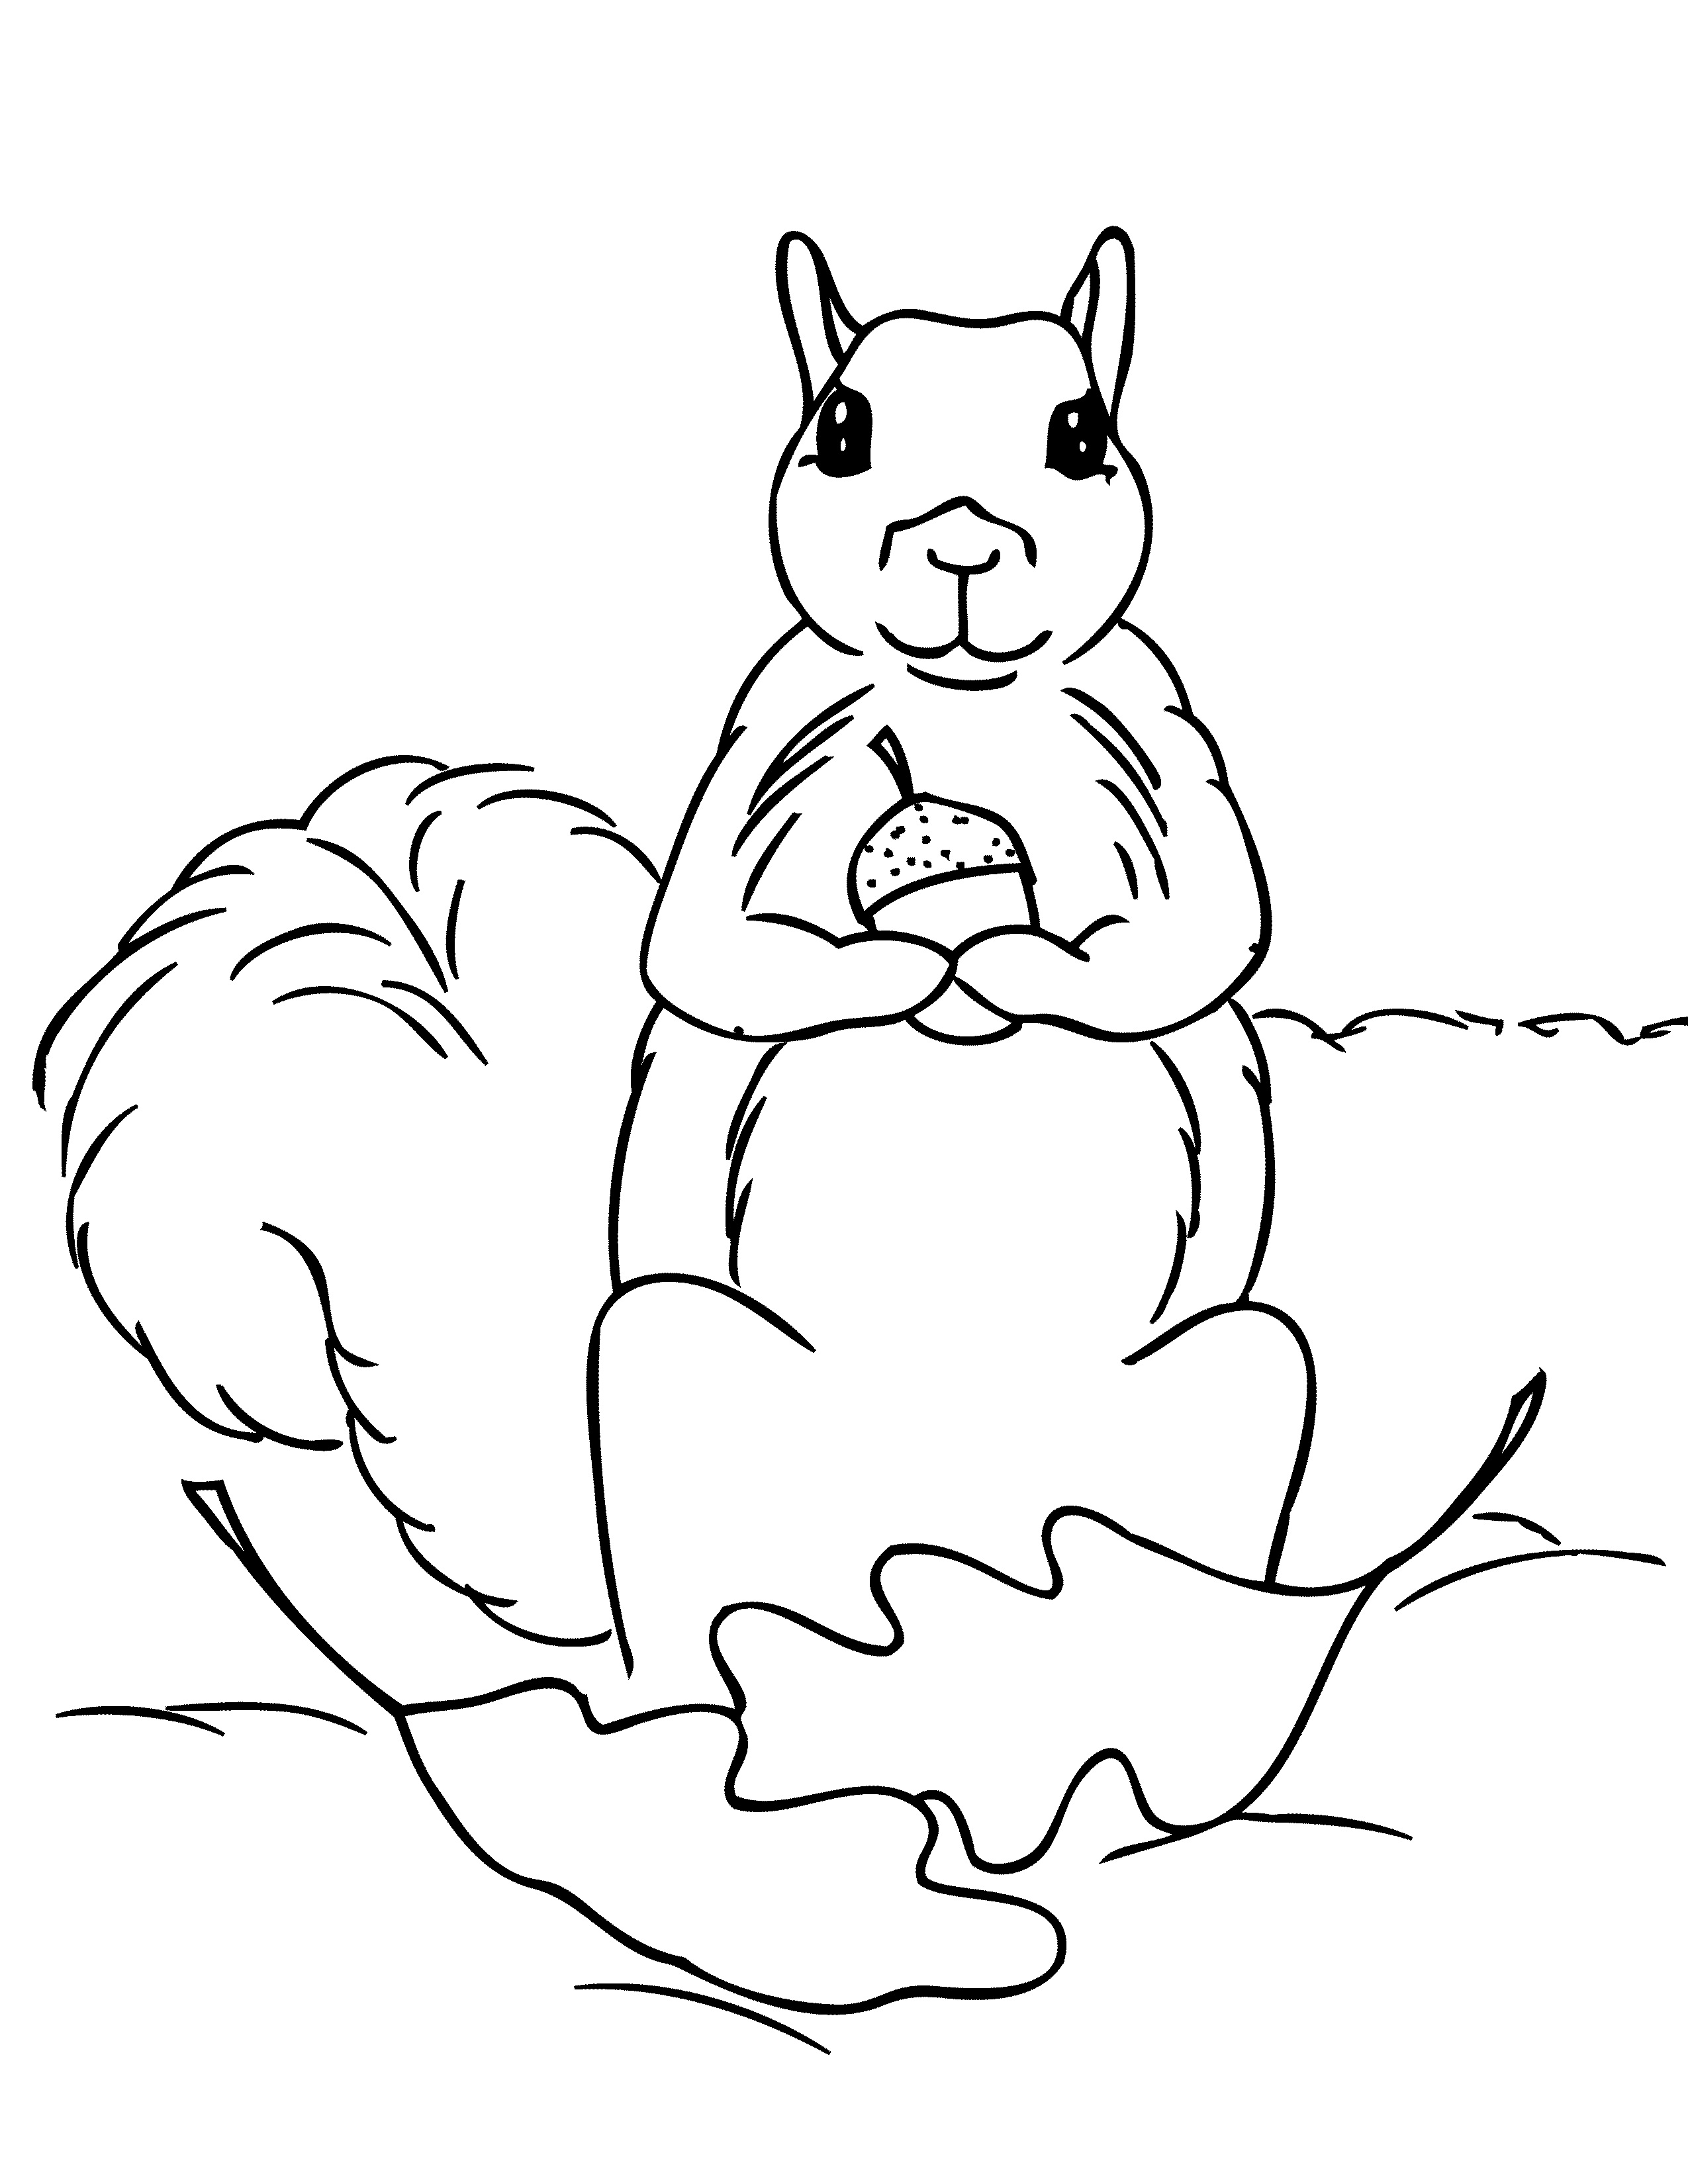 Squirrel Outline Coloring Page Coloring Pages